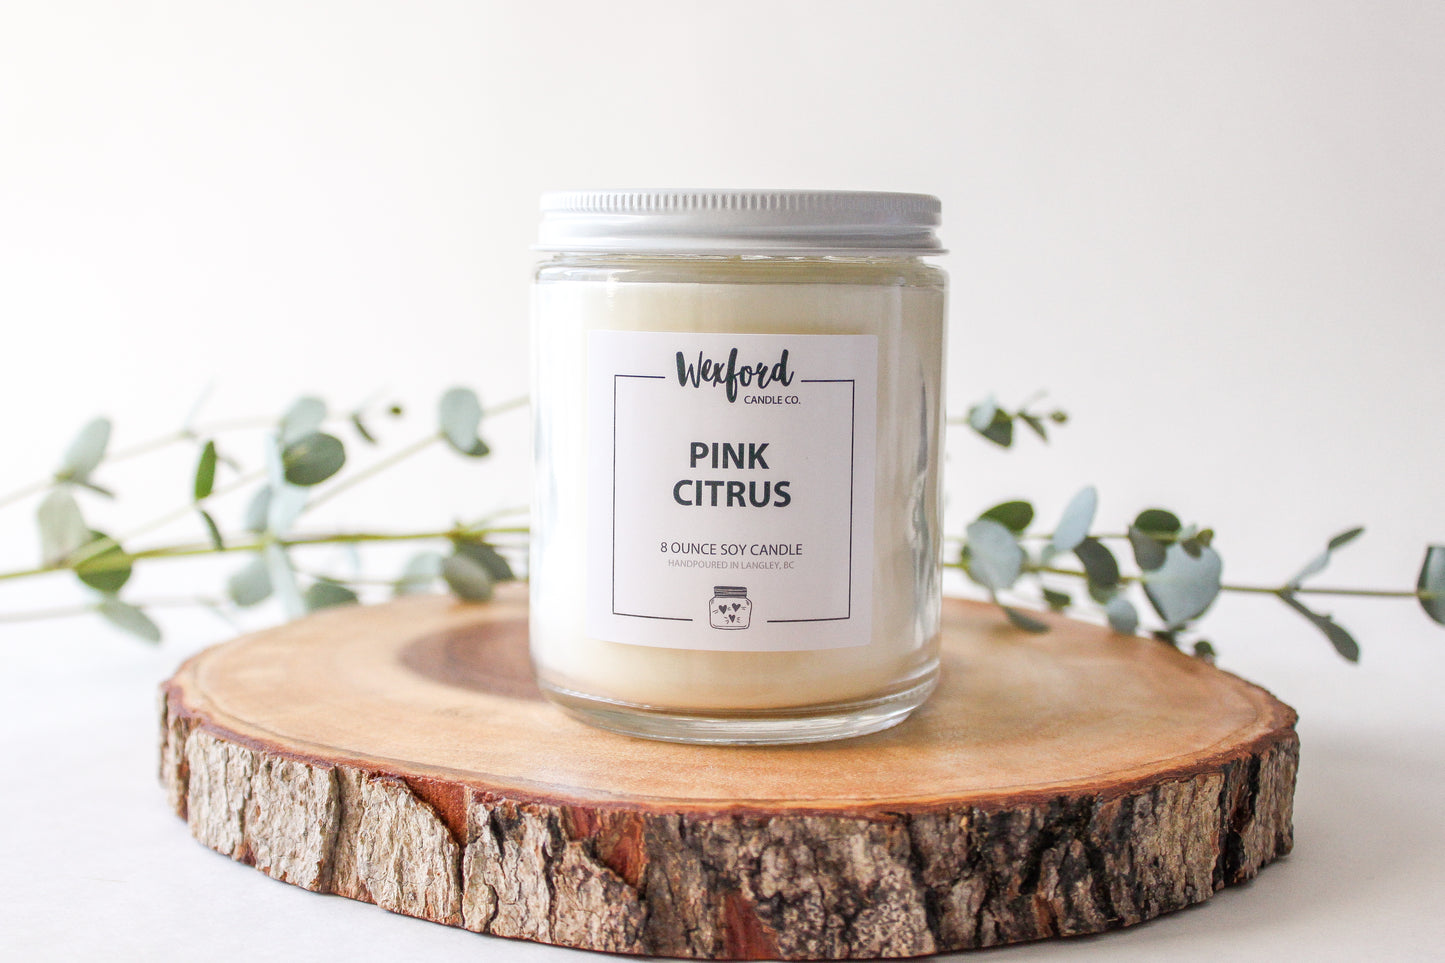 Pink Citrus Soy Candle - Wexford Candle Co.